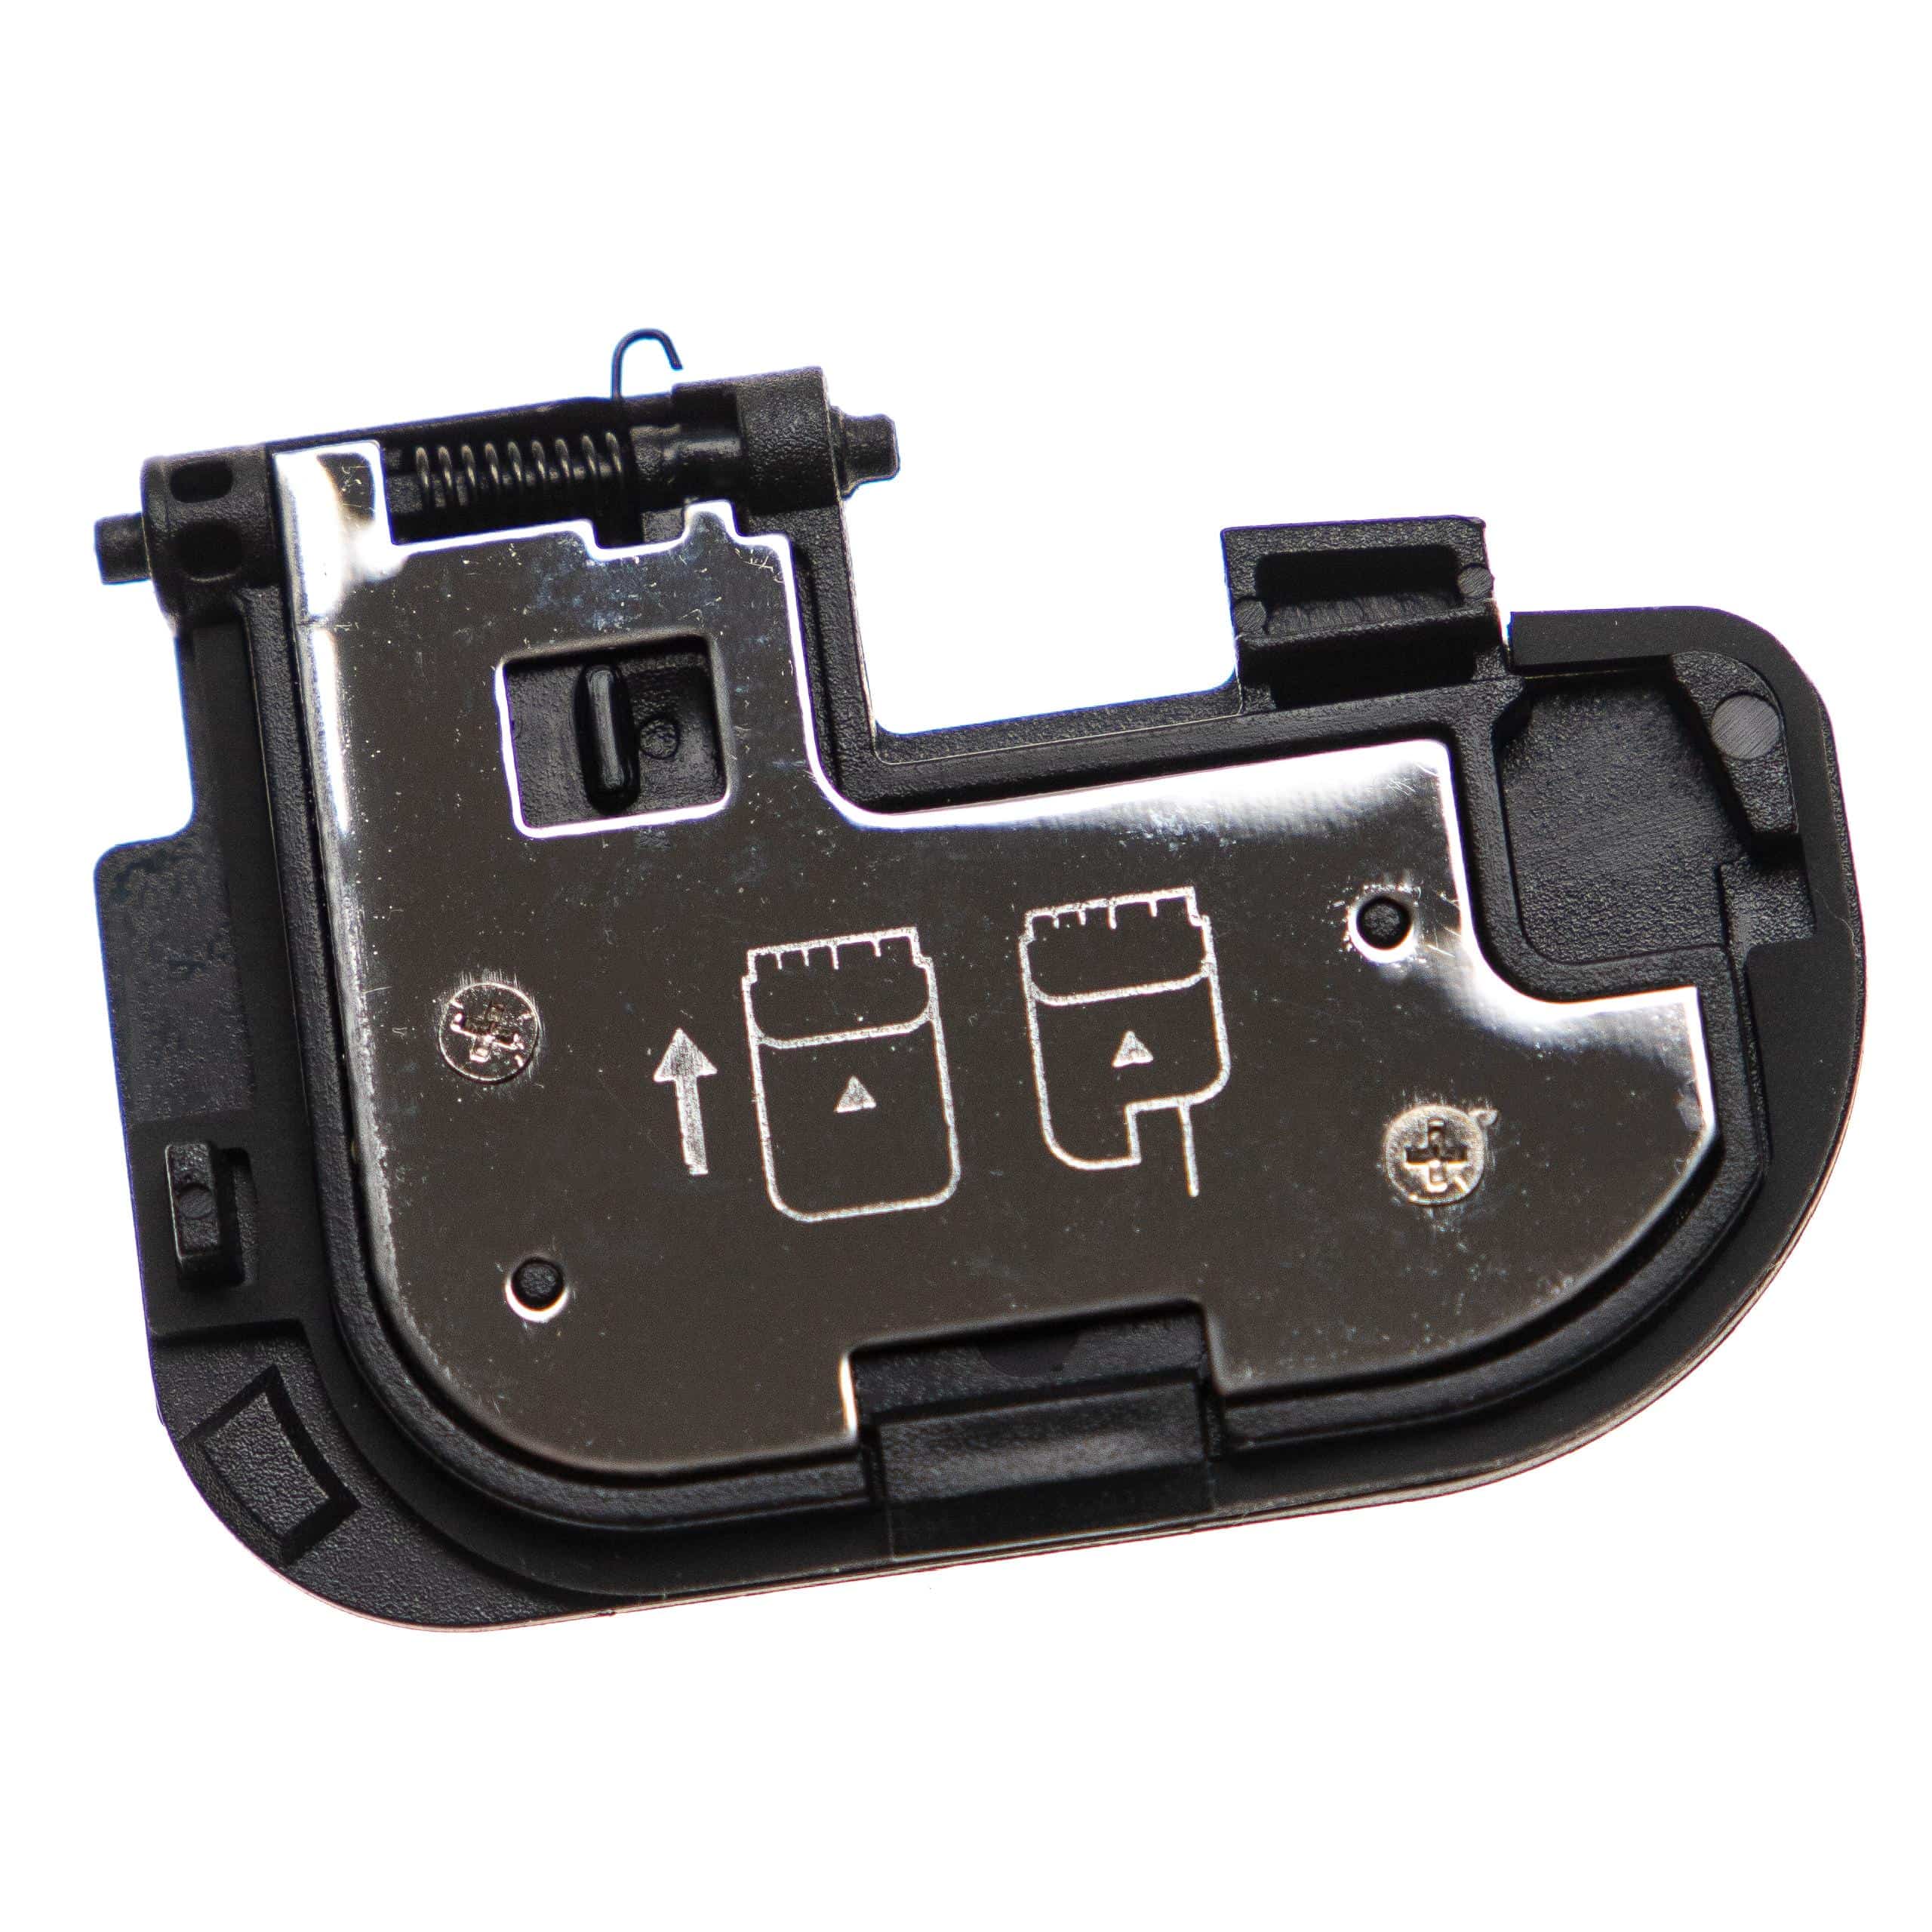 Battery Door Cover suitable for Canon EOS 6D Mark II Camera, Battery Grip